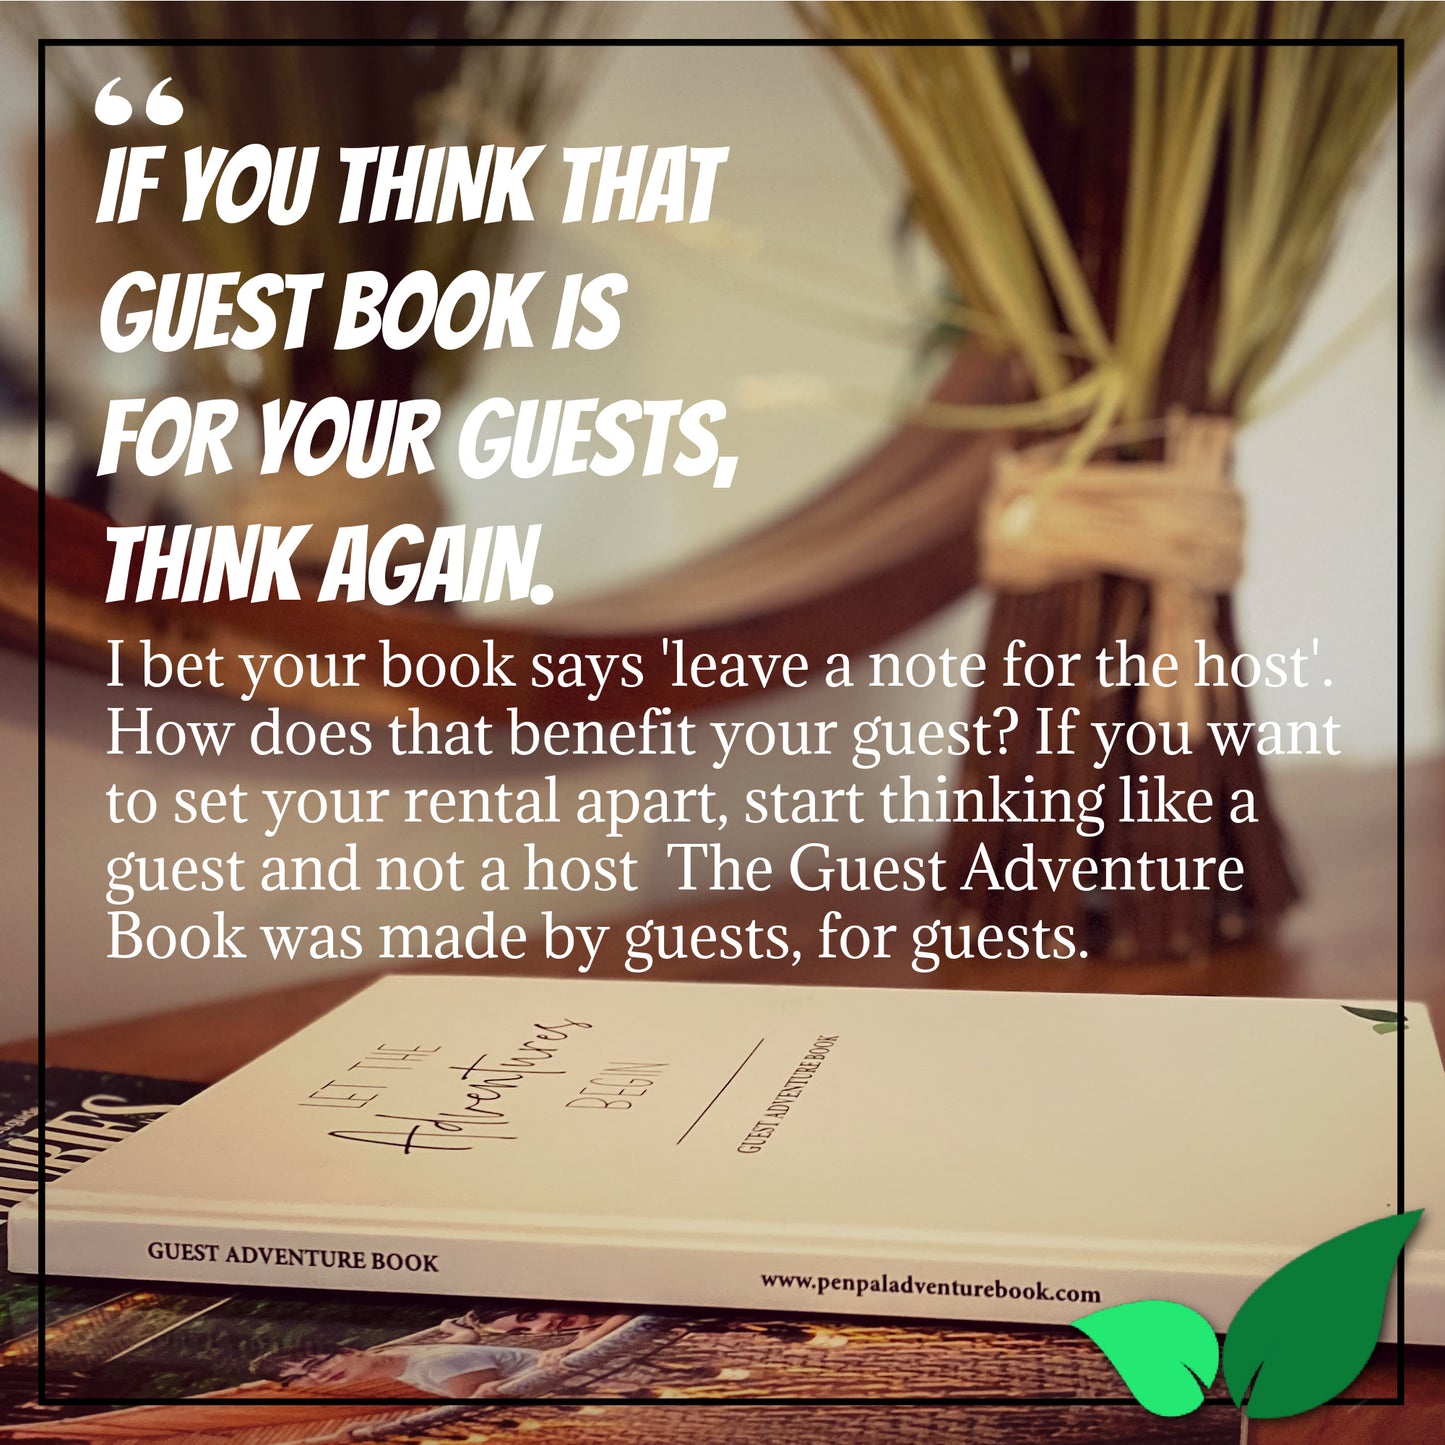 Guest Book: AirBnB Hardcover Guest Book, by Books, SMS